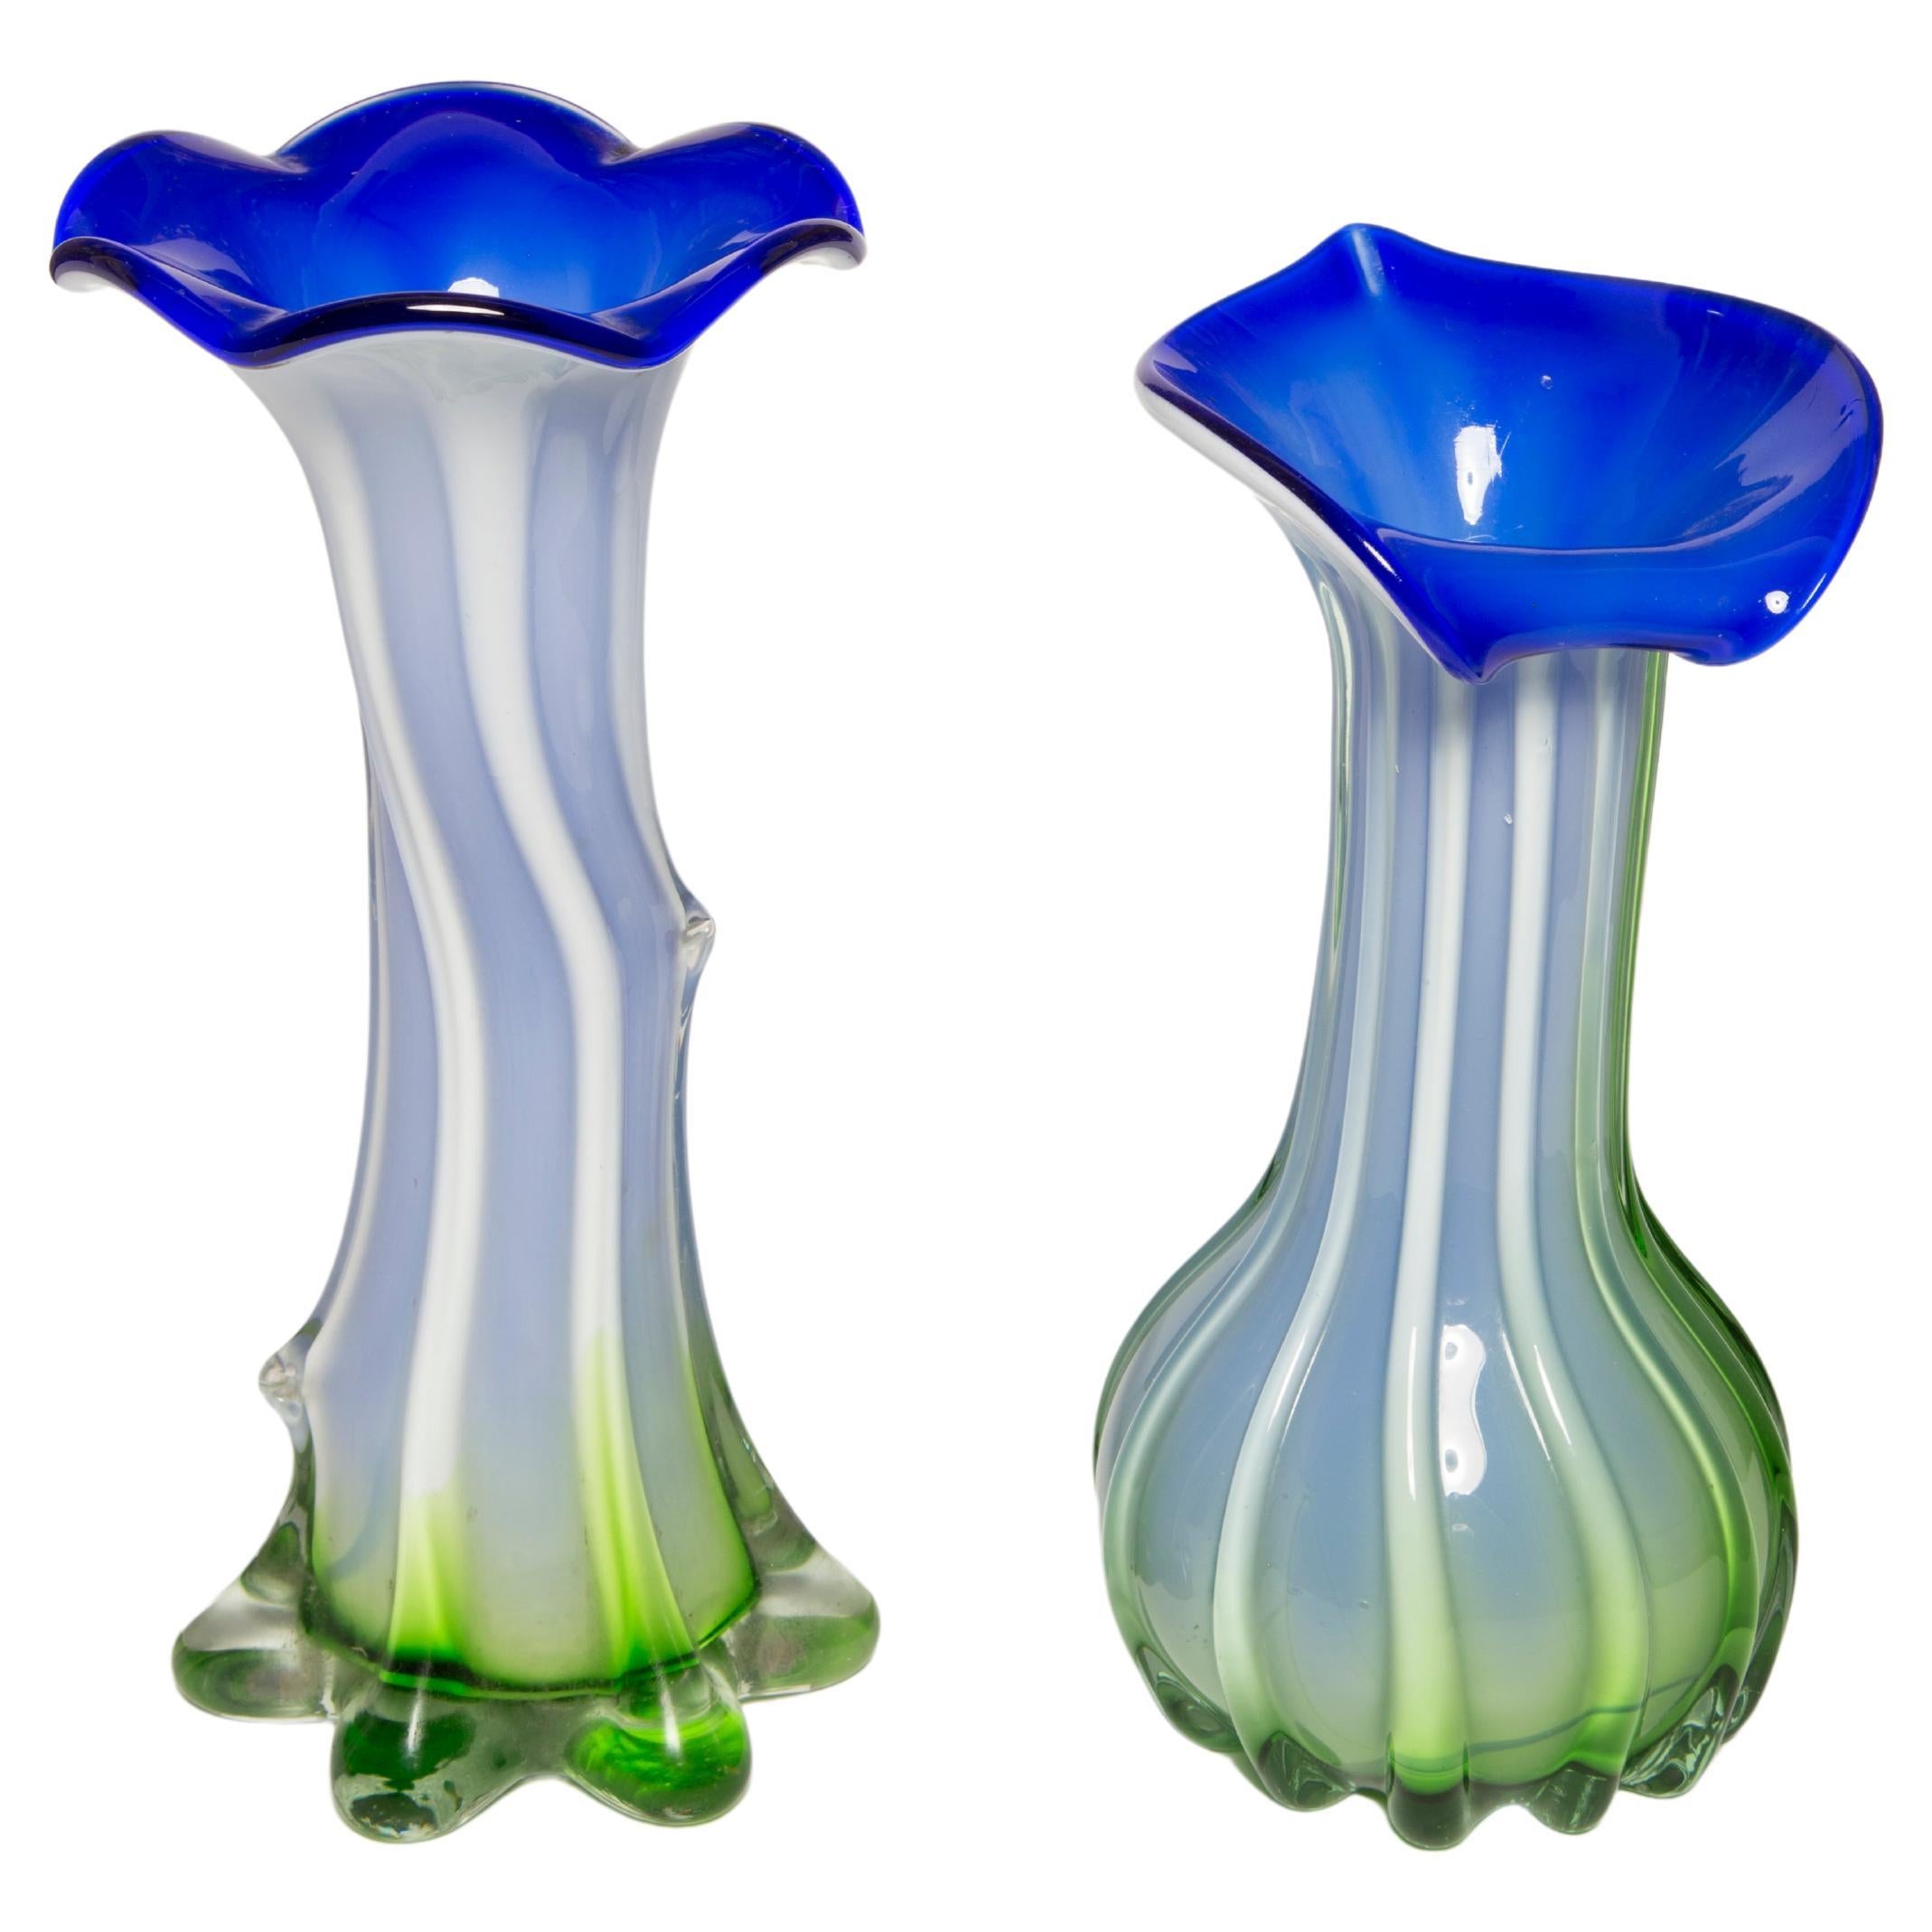 Set of Two Midcentury Vintage Green and Blue Murano Vases, Italy, 1960s